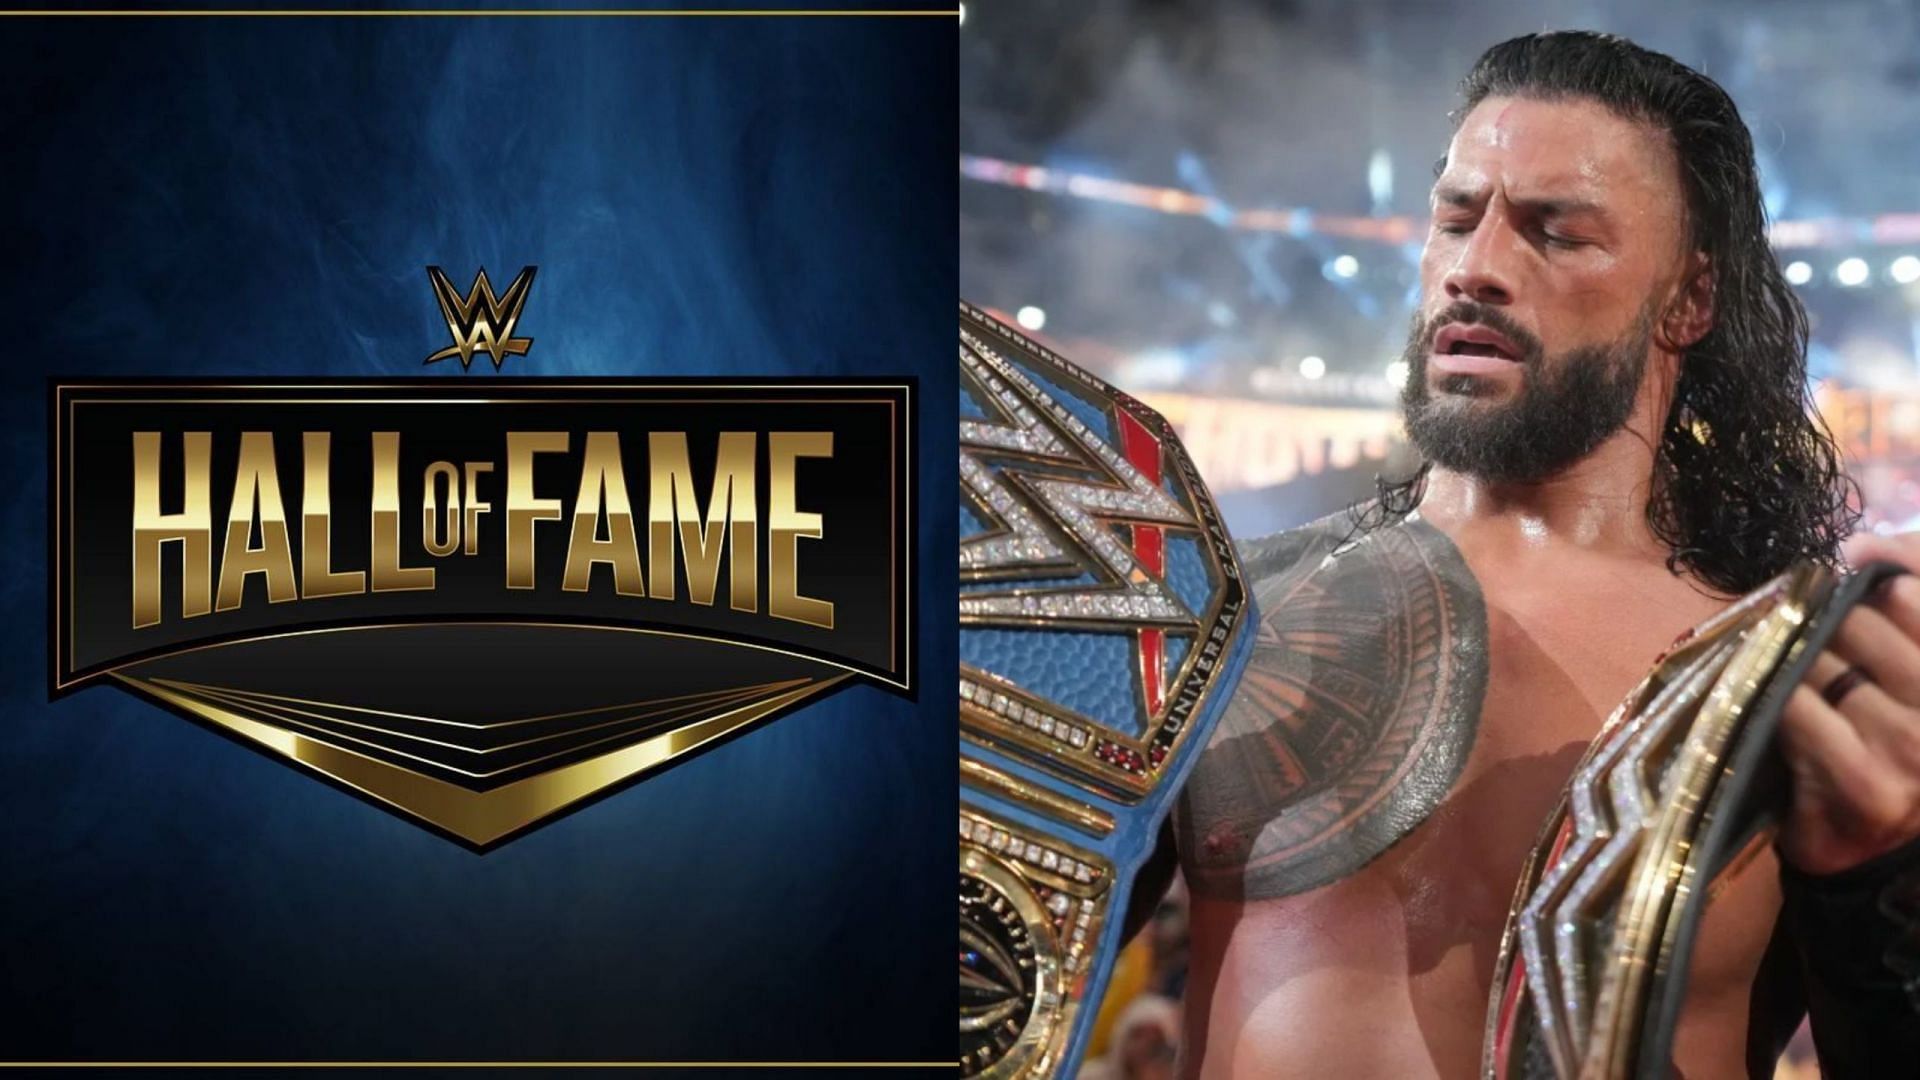 Roman Reigns received some praise from a WWE Hall of Famer recently.